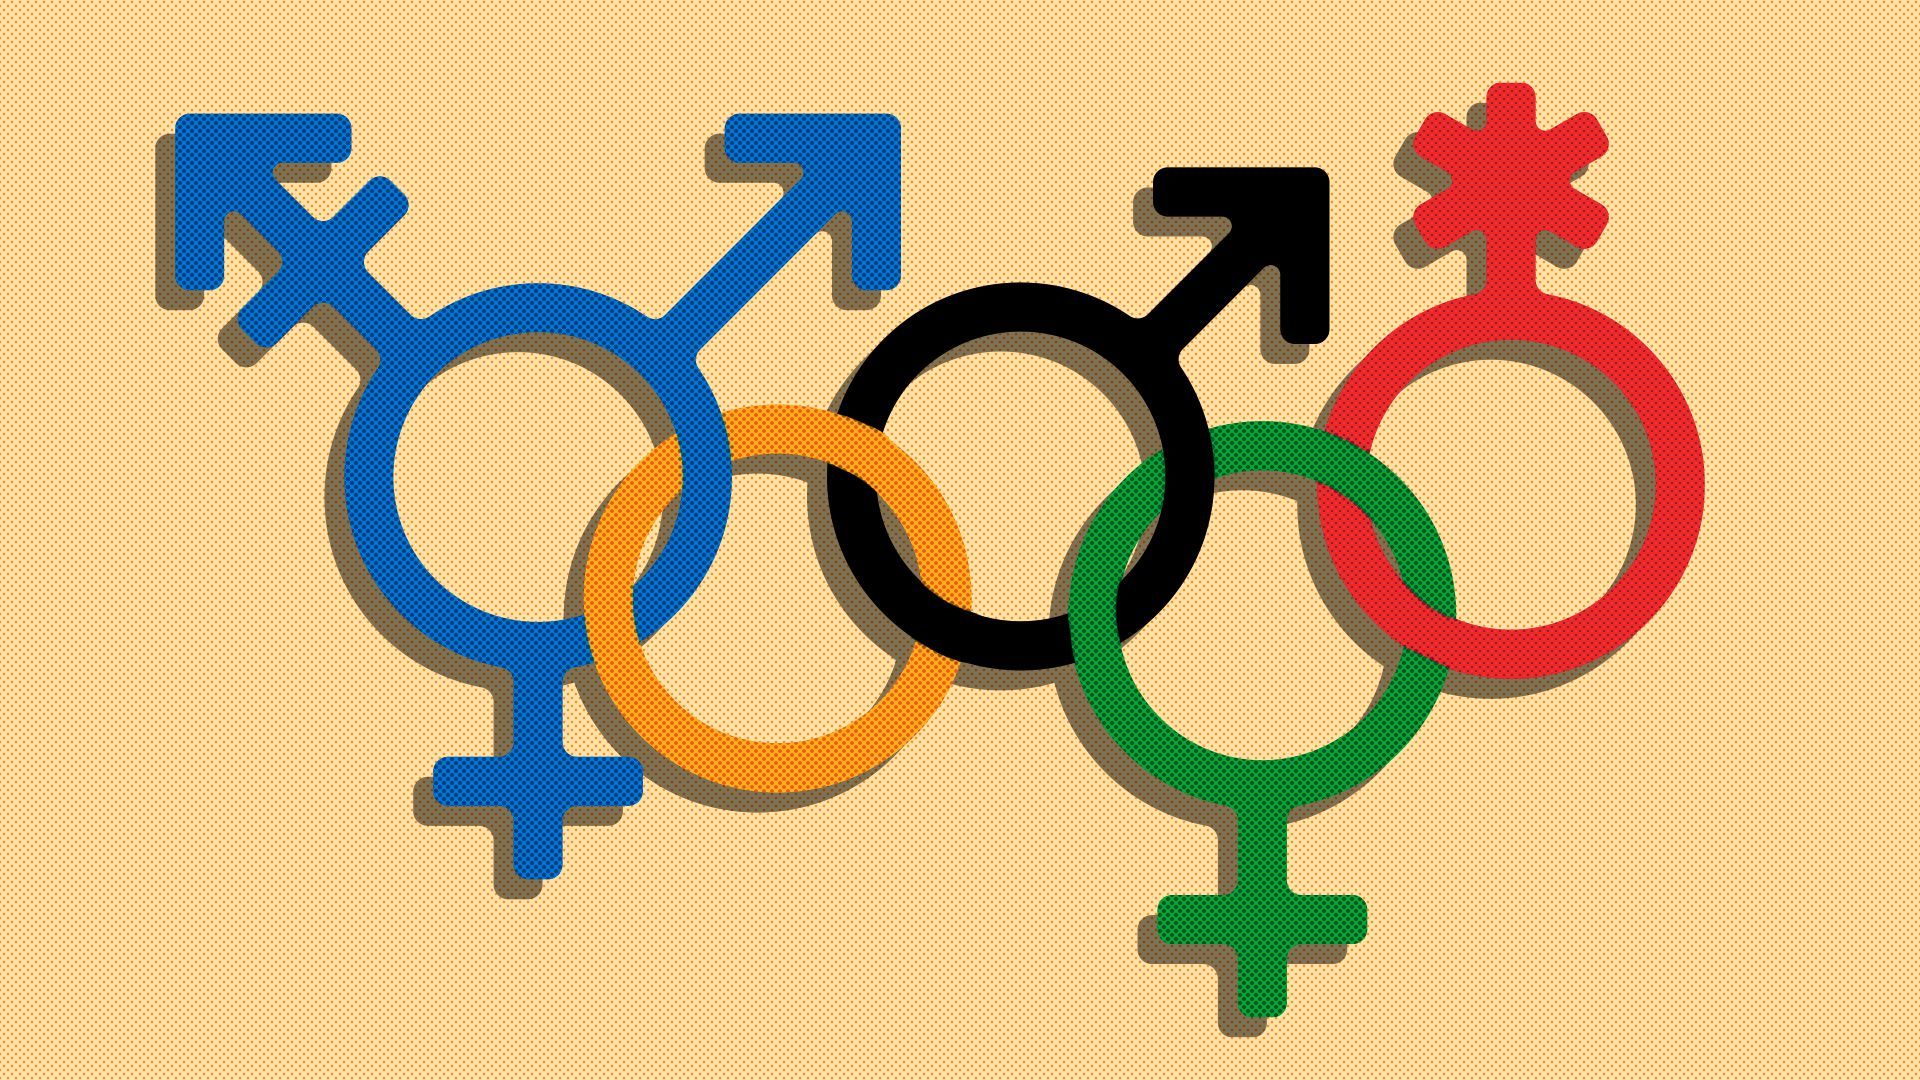 Illustration of the Olympic rings stylized as various gender identity icons.